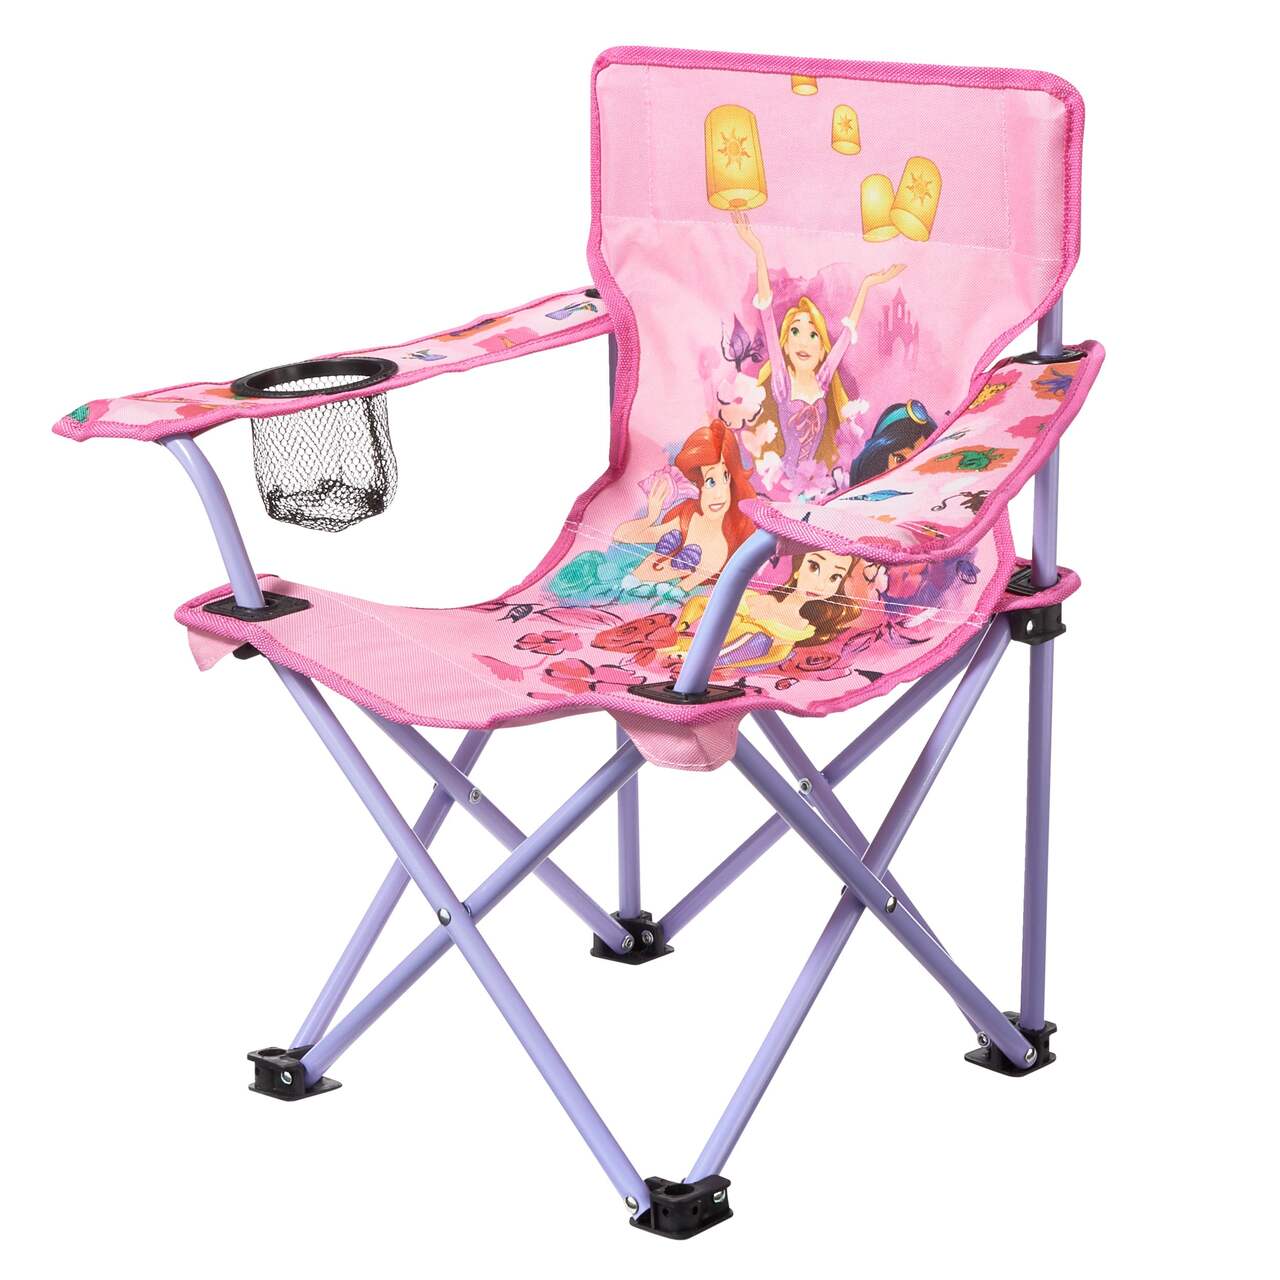 Outbound Lightweight Folding Camping Quad Chair w/ Solid Armrests & Swivel  Cup Holder